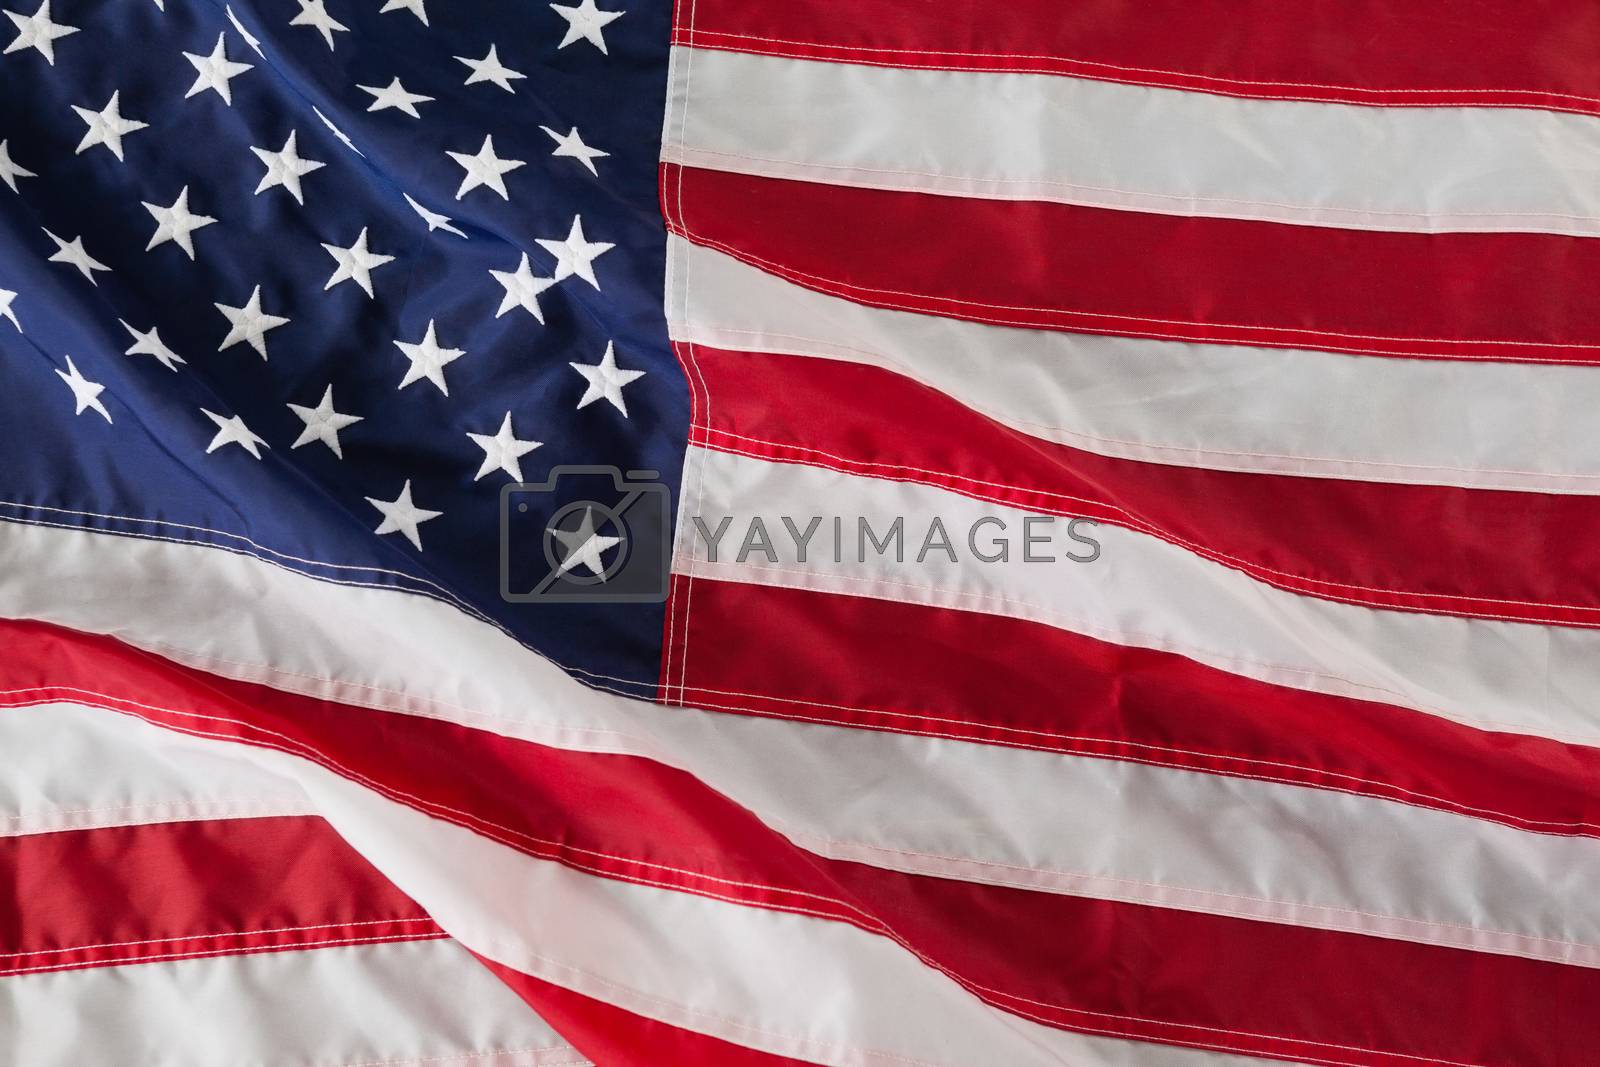 Royalty free image of Close-up of an American flag by Wavebreakmedia